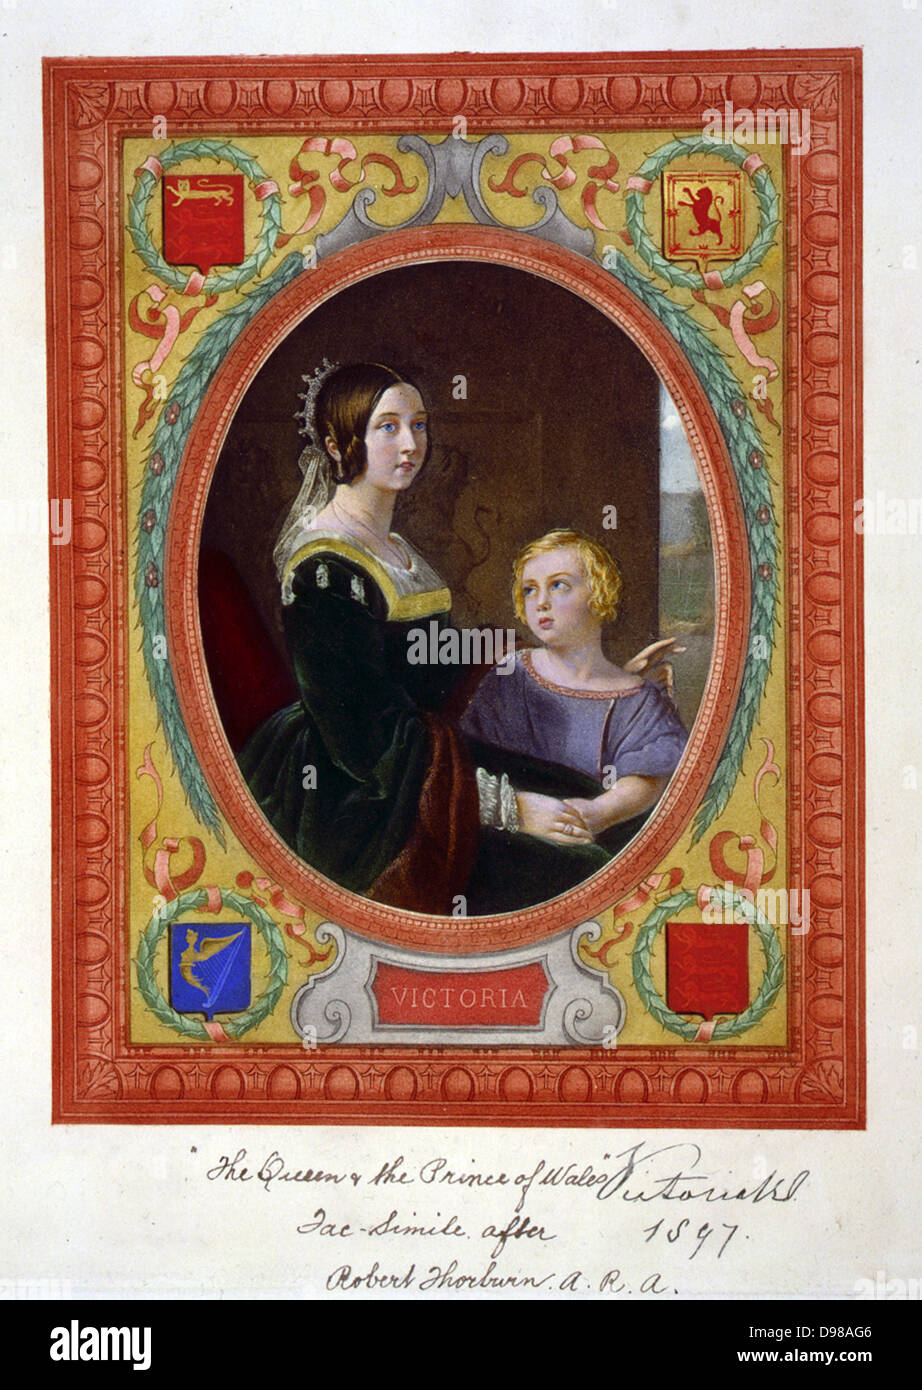 Victoria (1820-1901) Queen of Great Britain and Ireland, with the Prince of Wales (later Edward VII) as a boy. Lithograph published c1897 to mark the Queen's Jubilee. Stock Photo